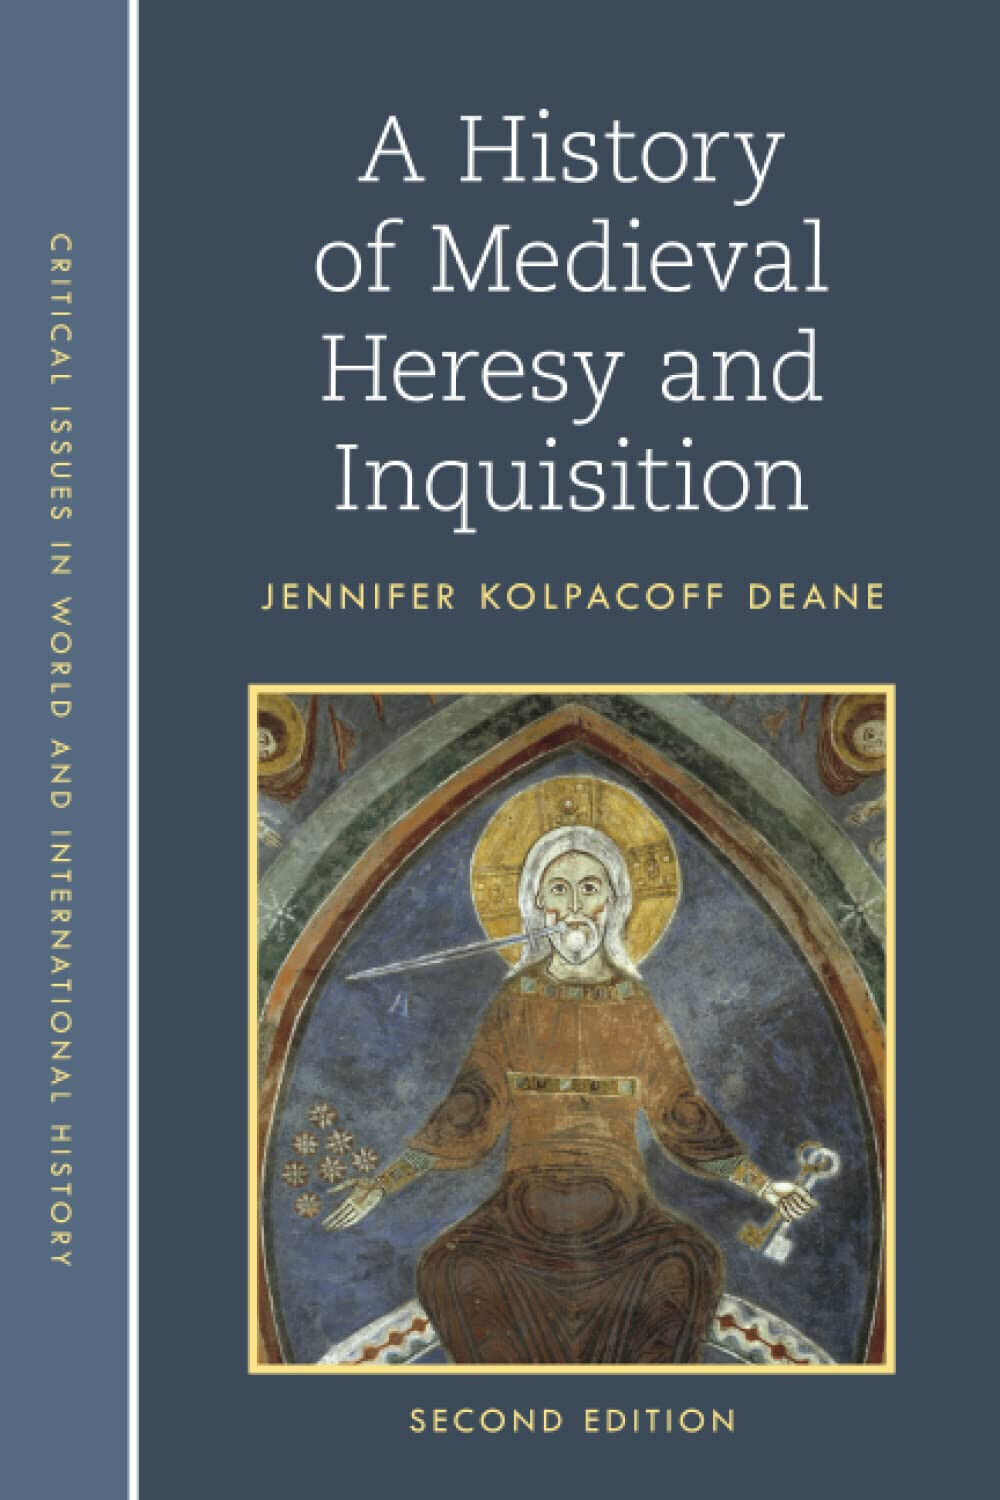 A History Of Medieval Heresy And Inquisition - Jennifer Kolpacoff Deane - 2022 libro usato